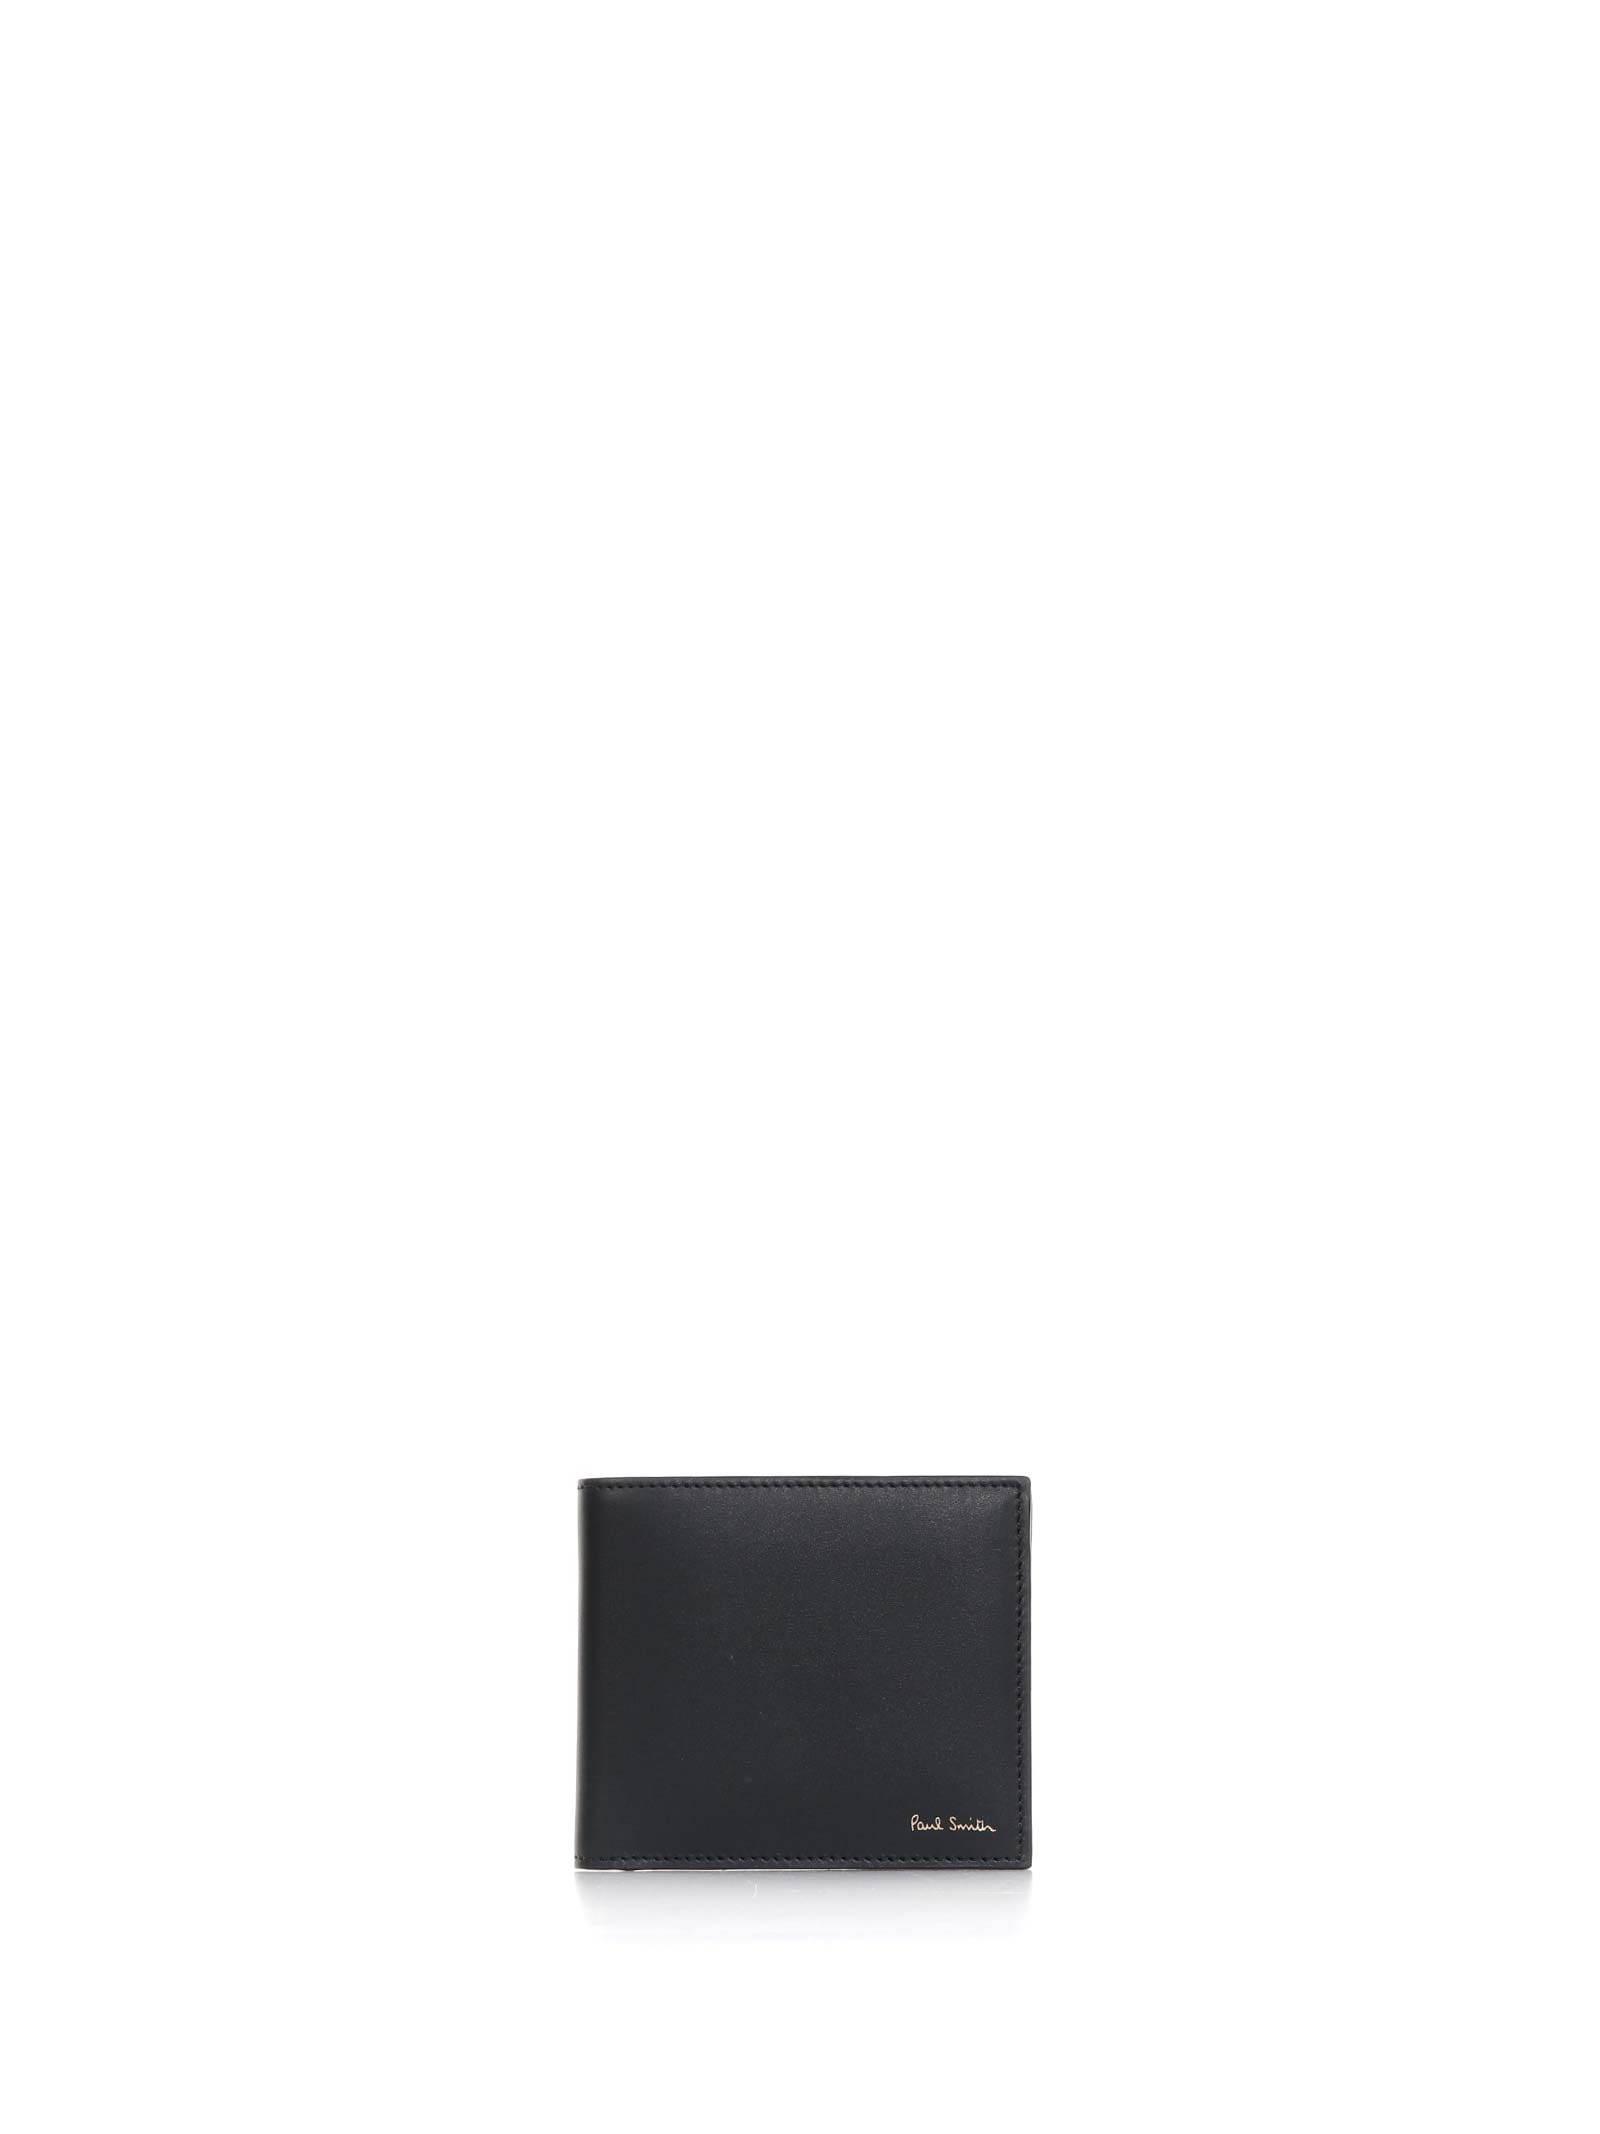 Paul Smith Wallet In Black Leather